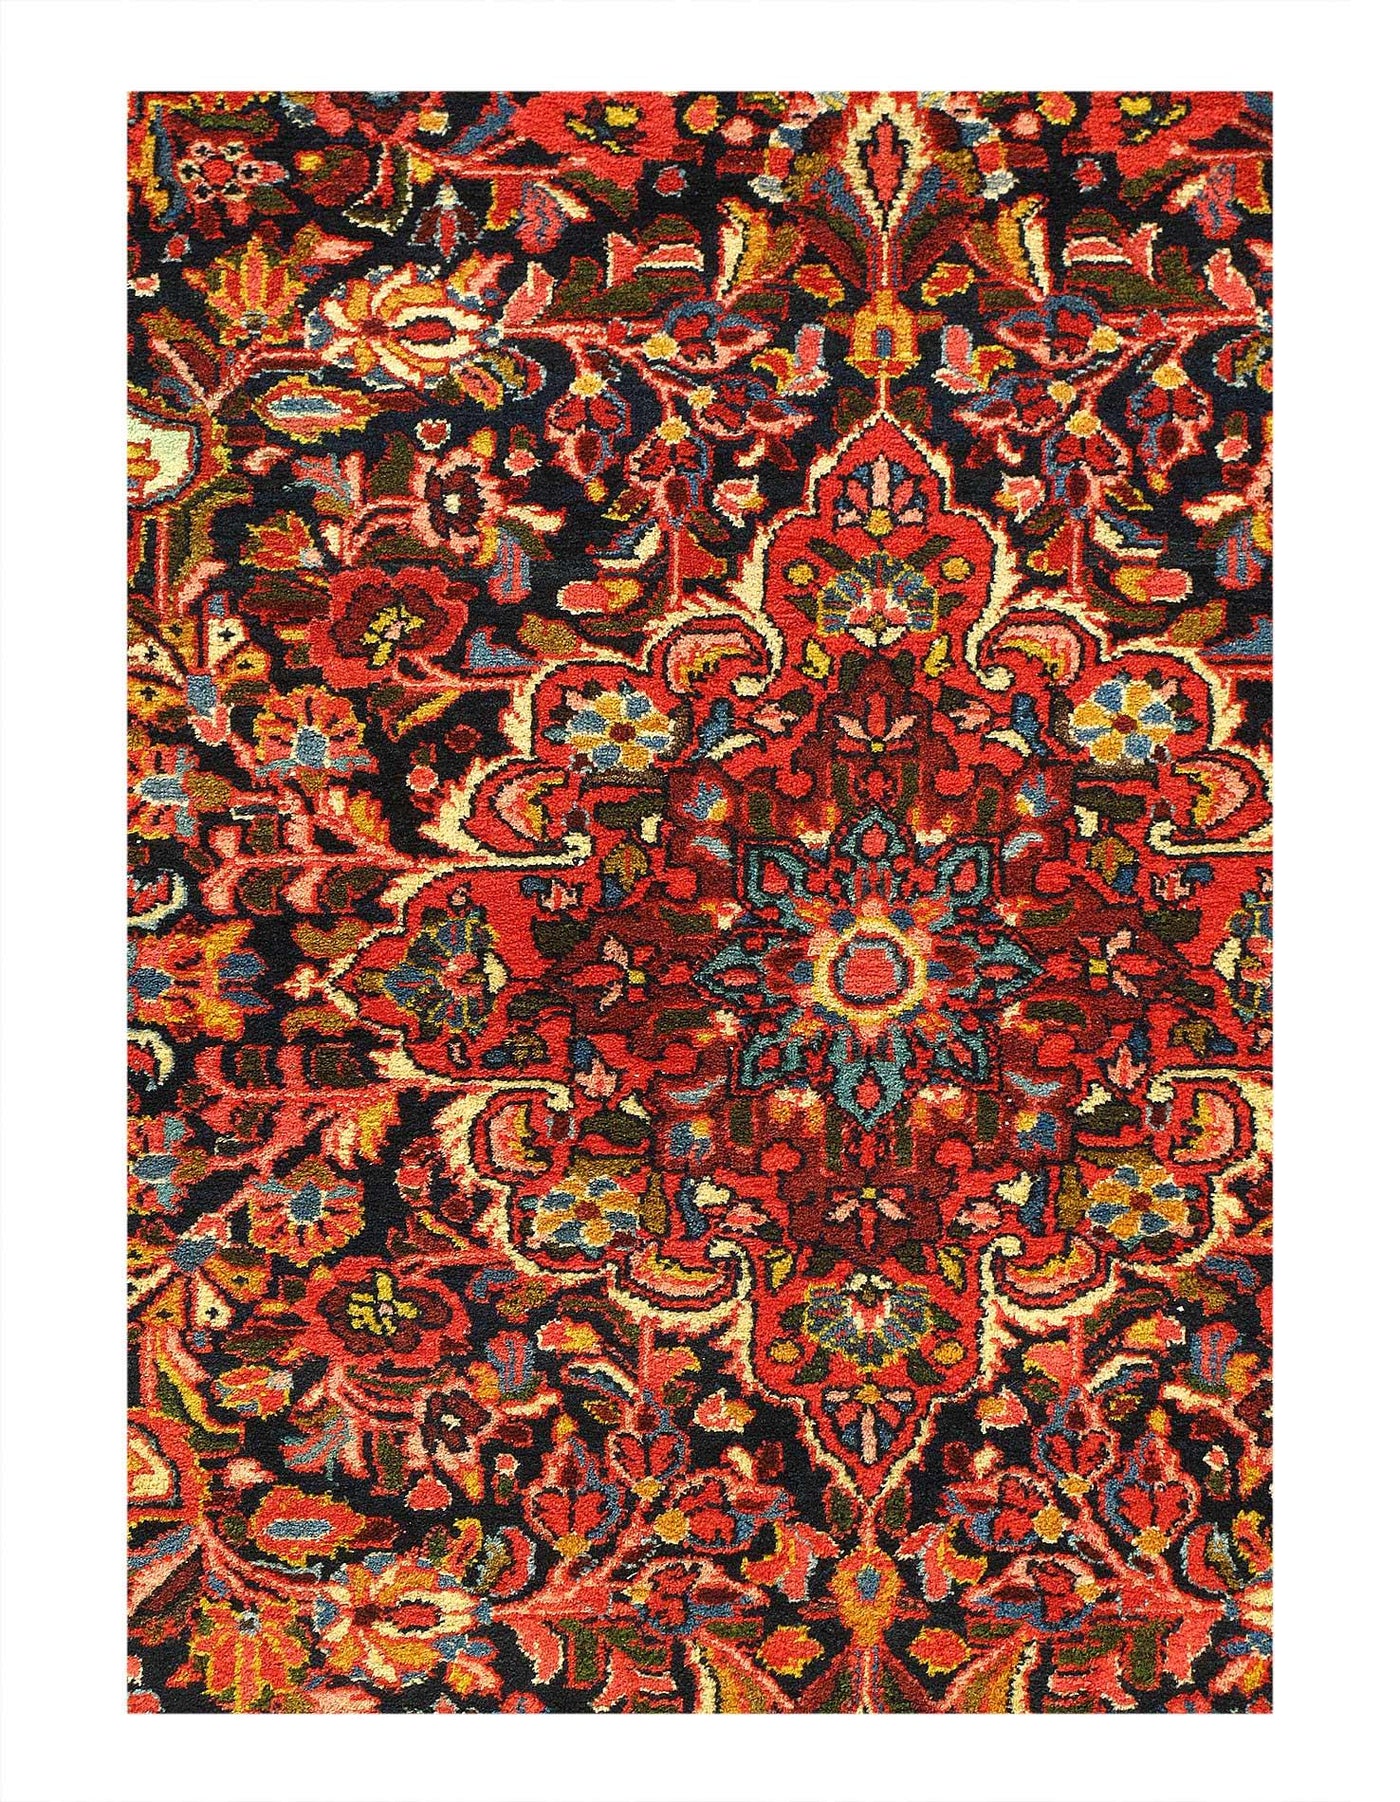 Canvello 1970s Hand Knotted Persian Vintage Balouchi Rug - 4'6'' X 6'11''